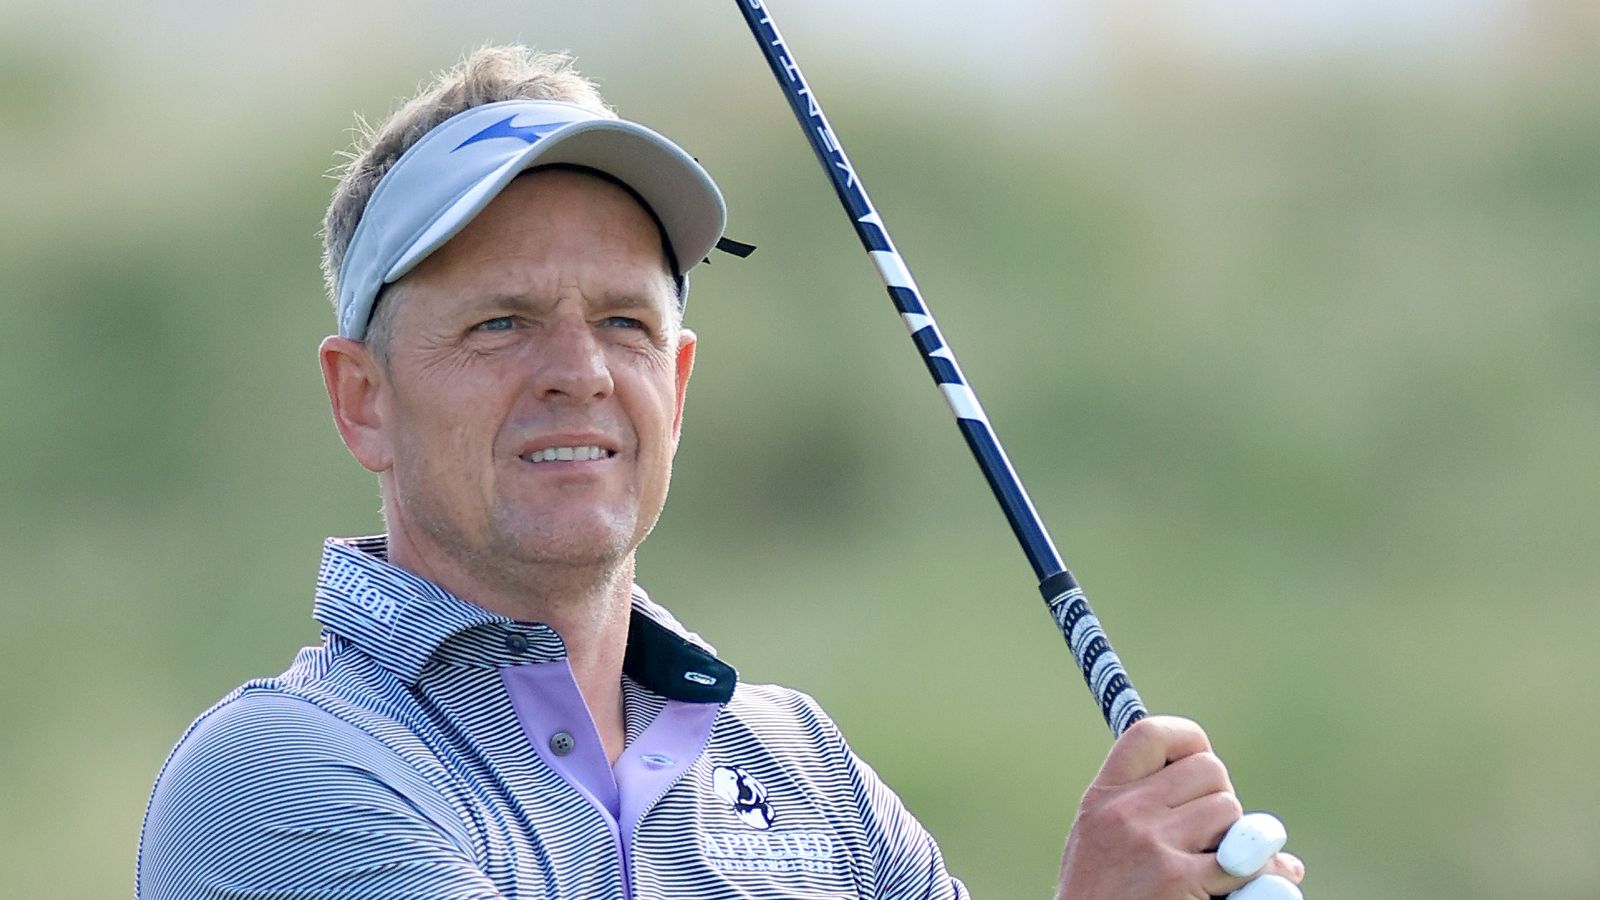 Abu Dhabi HSBC Championship: Ryder Cup captain Luke Donald grabs lead in Rolex Series opener